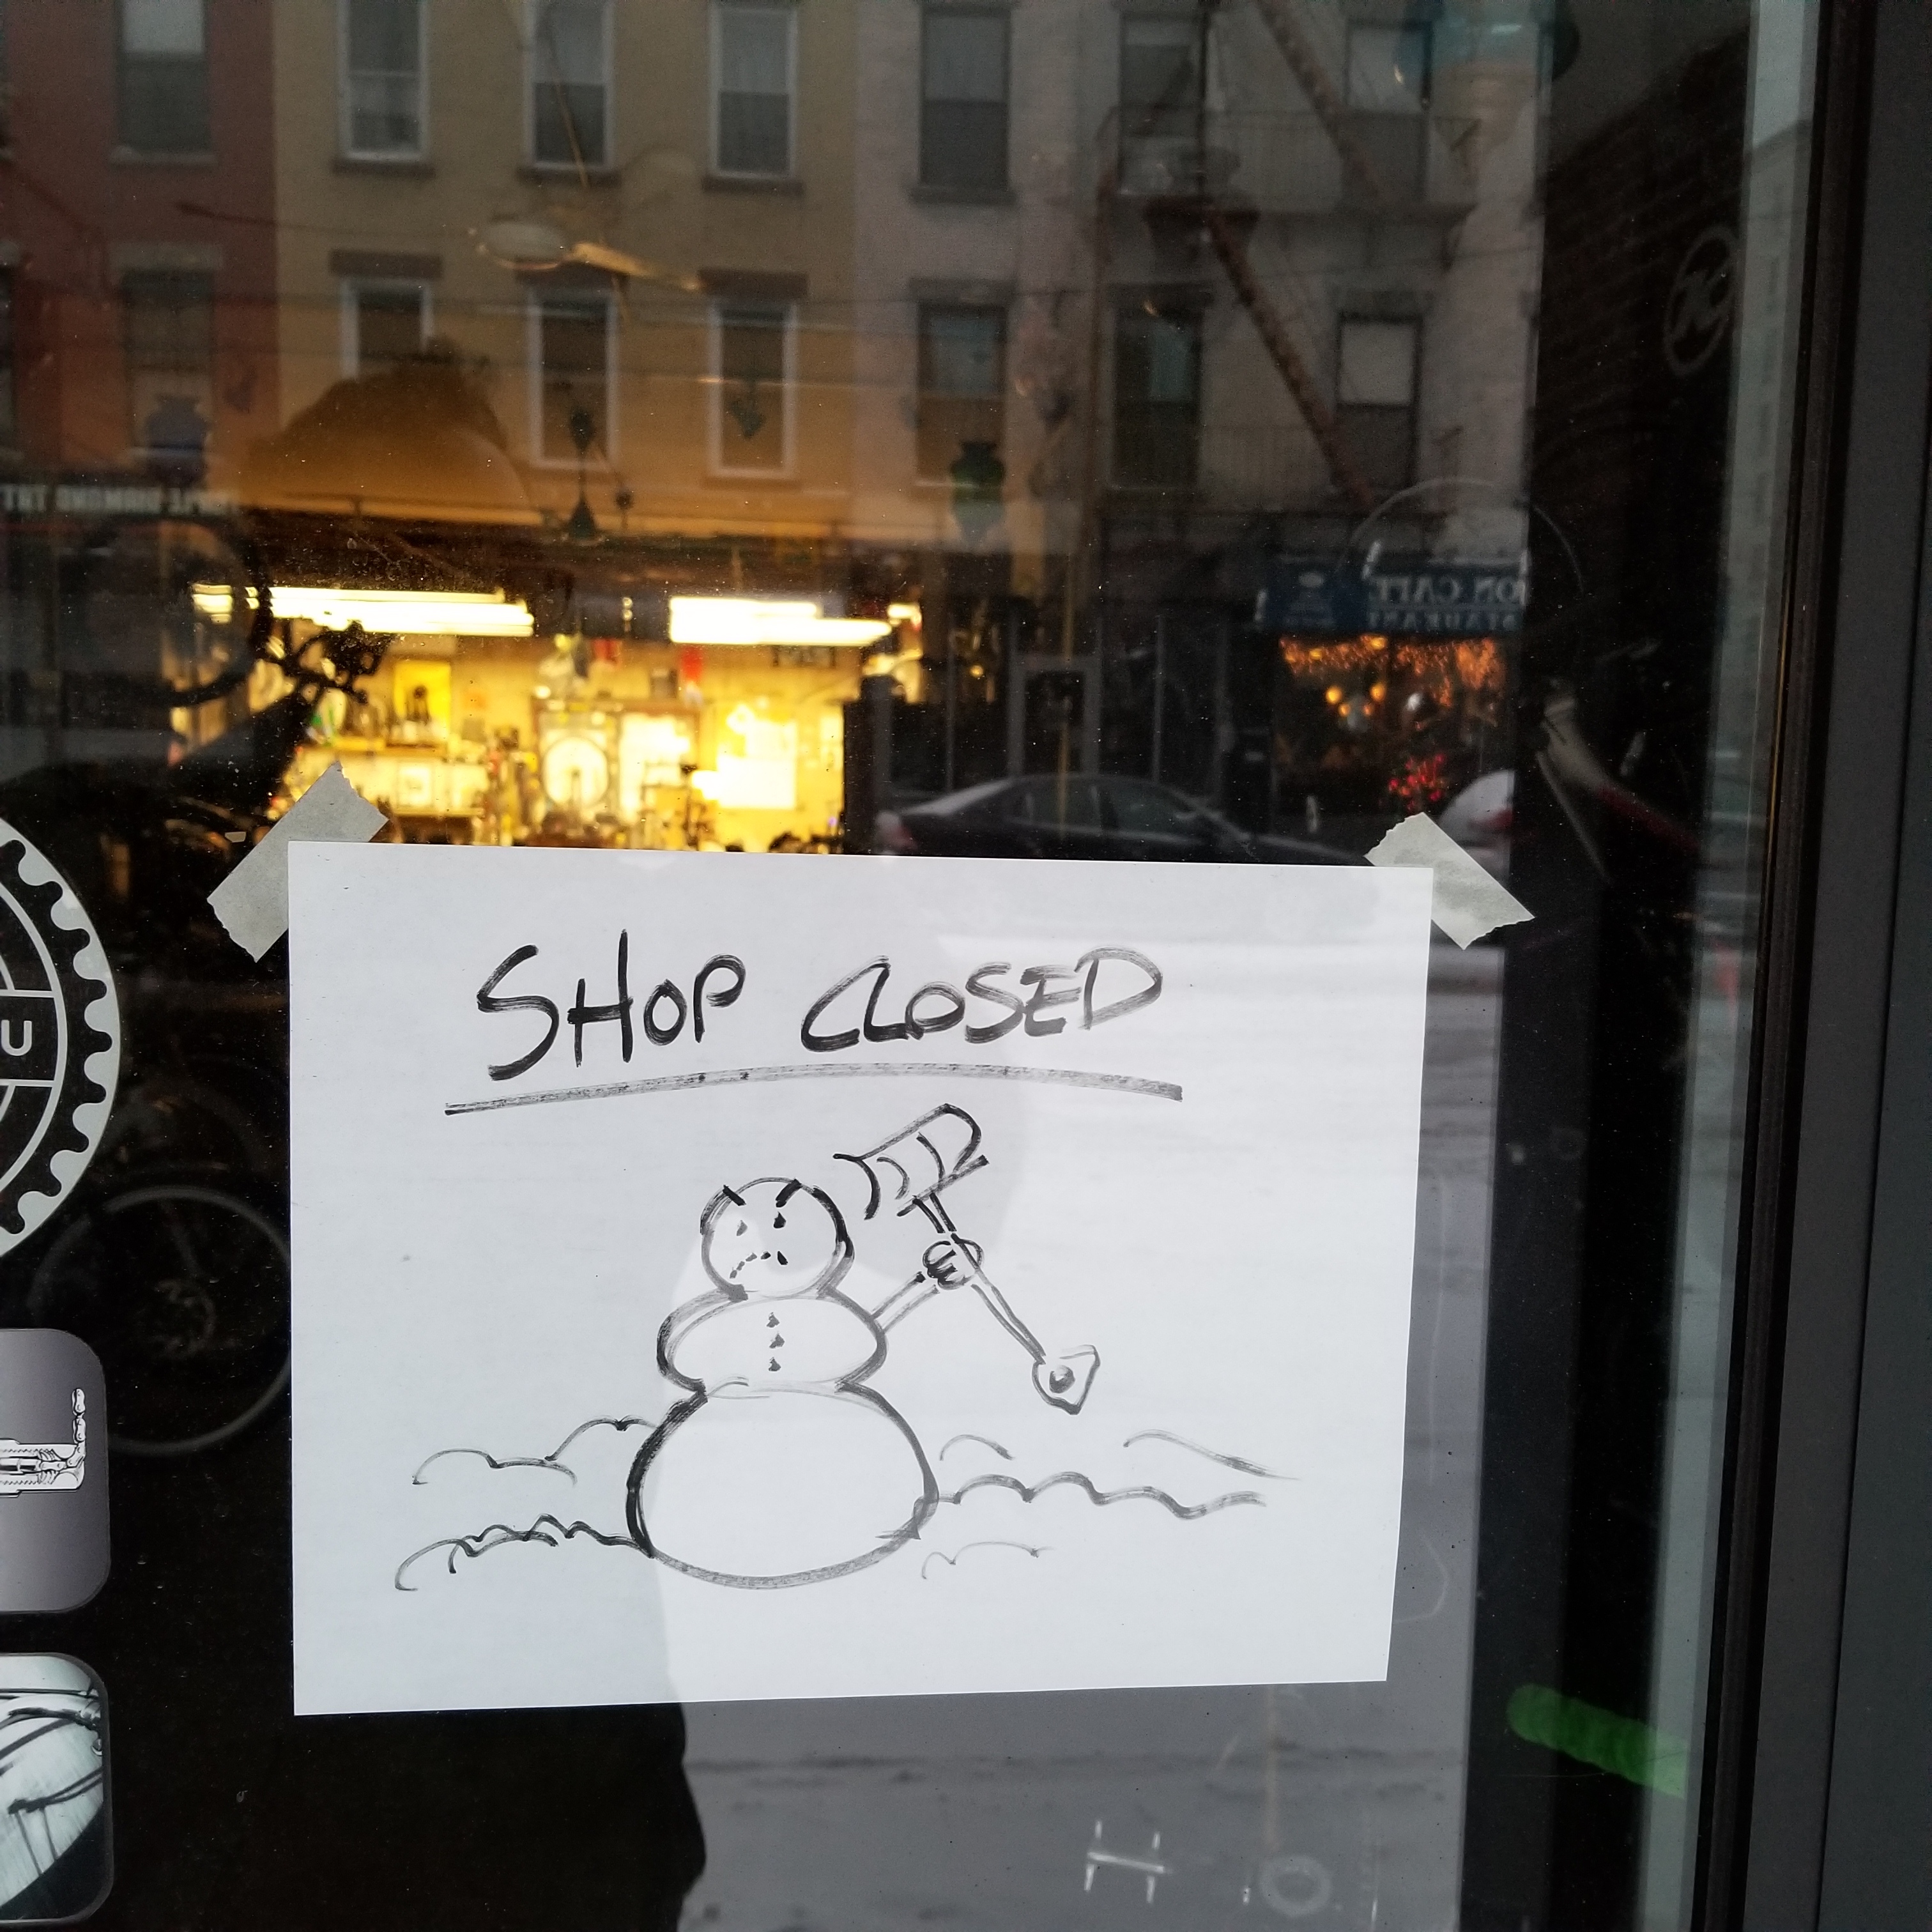 A mad snowman greets customers at 718 Cyclery.